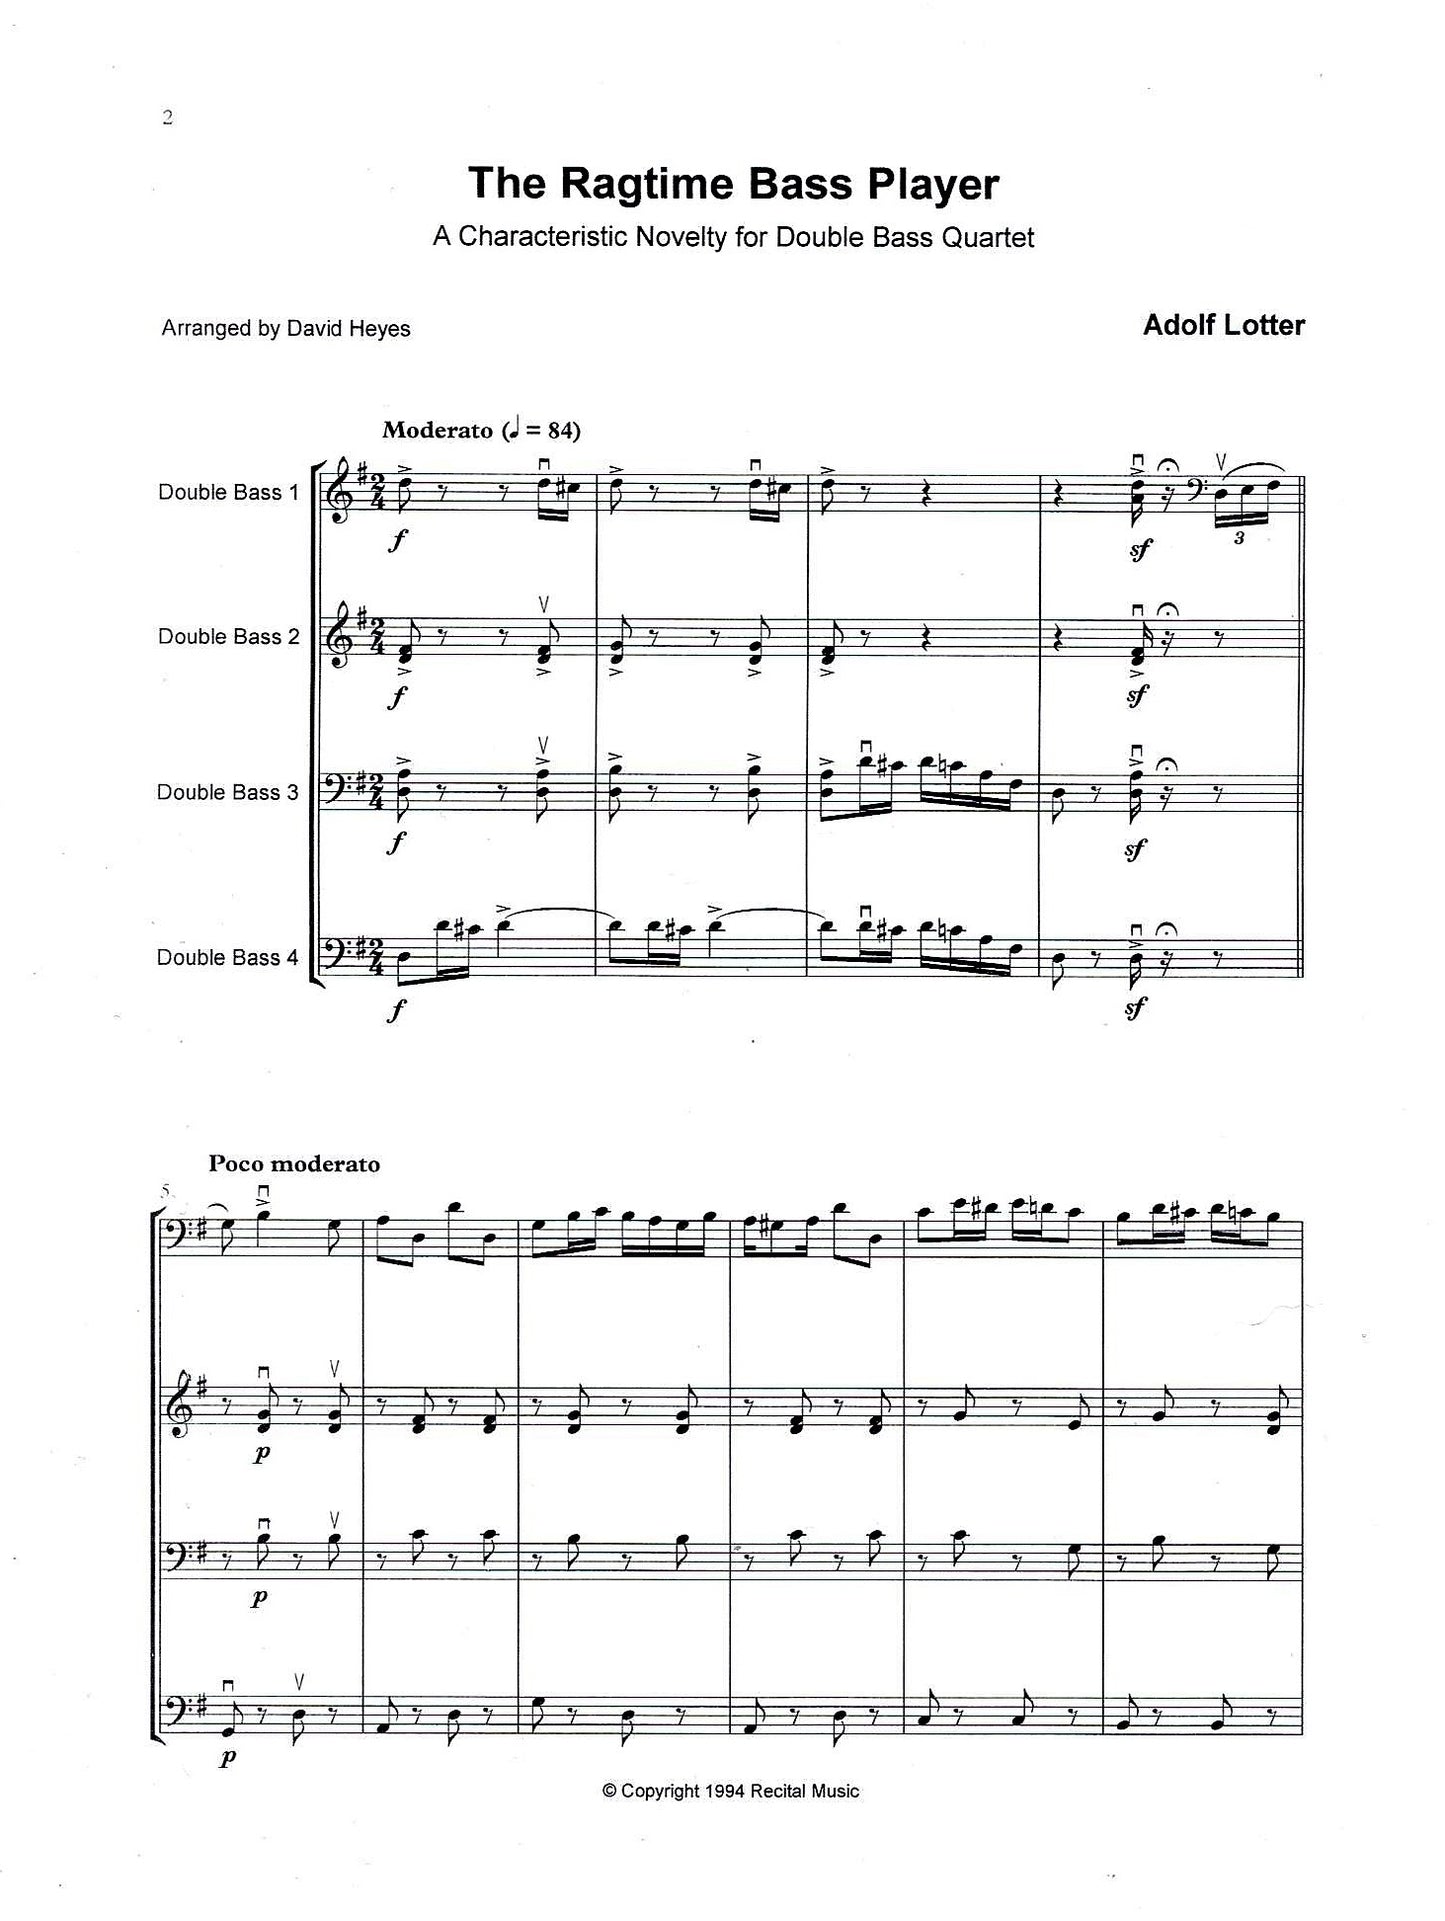 Adolf Lotter: The Ragtime Bass Player for double bass quartet (arr. David Heyes)